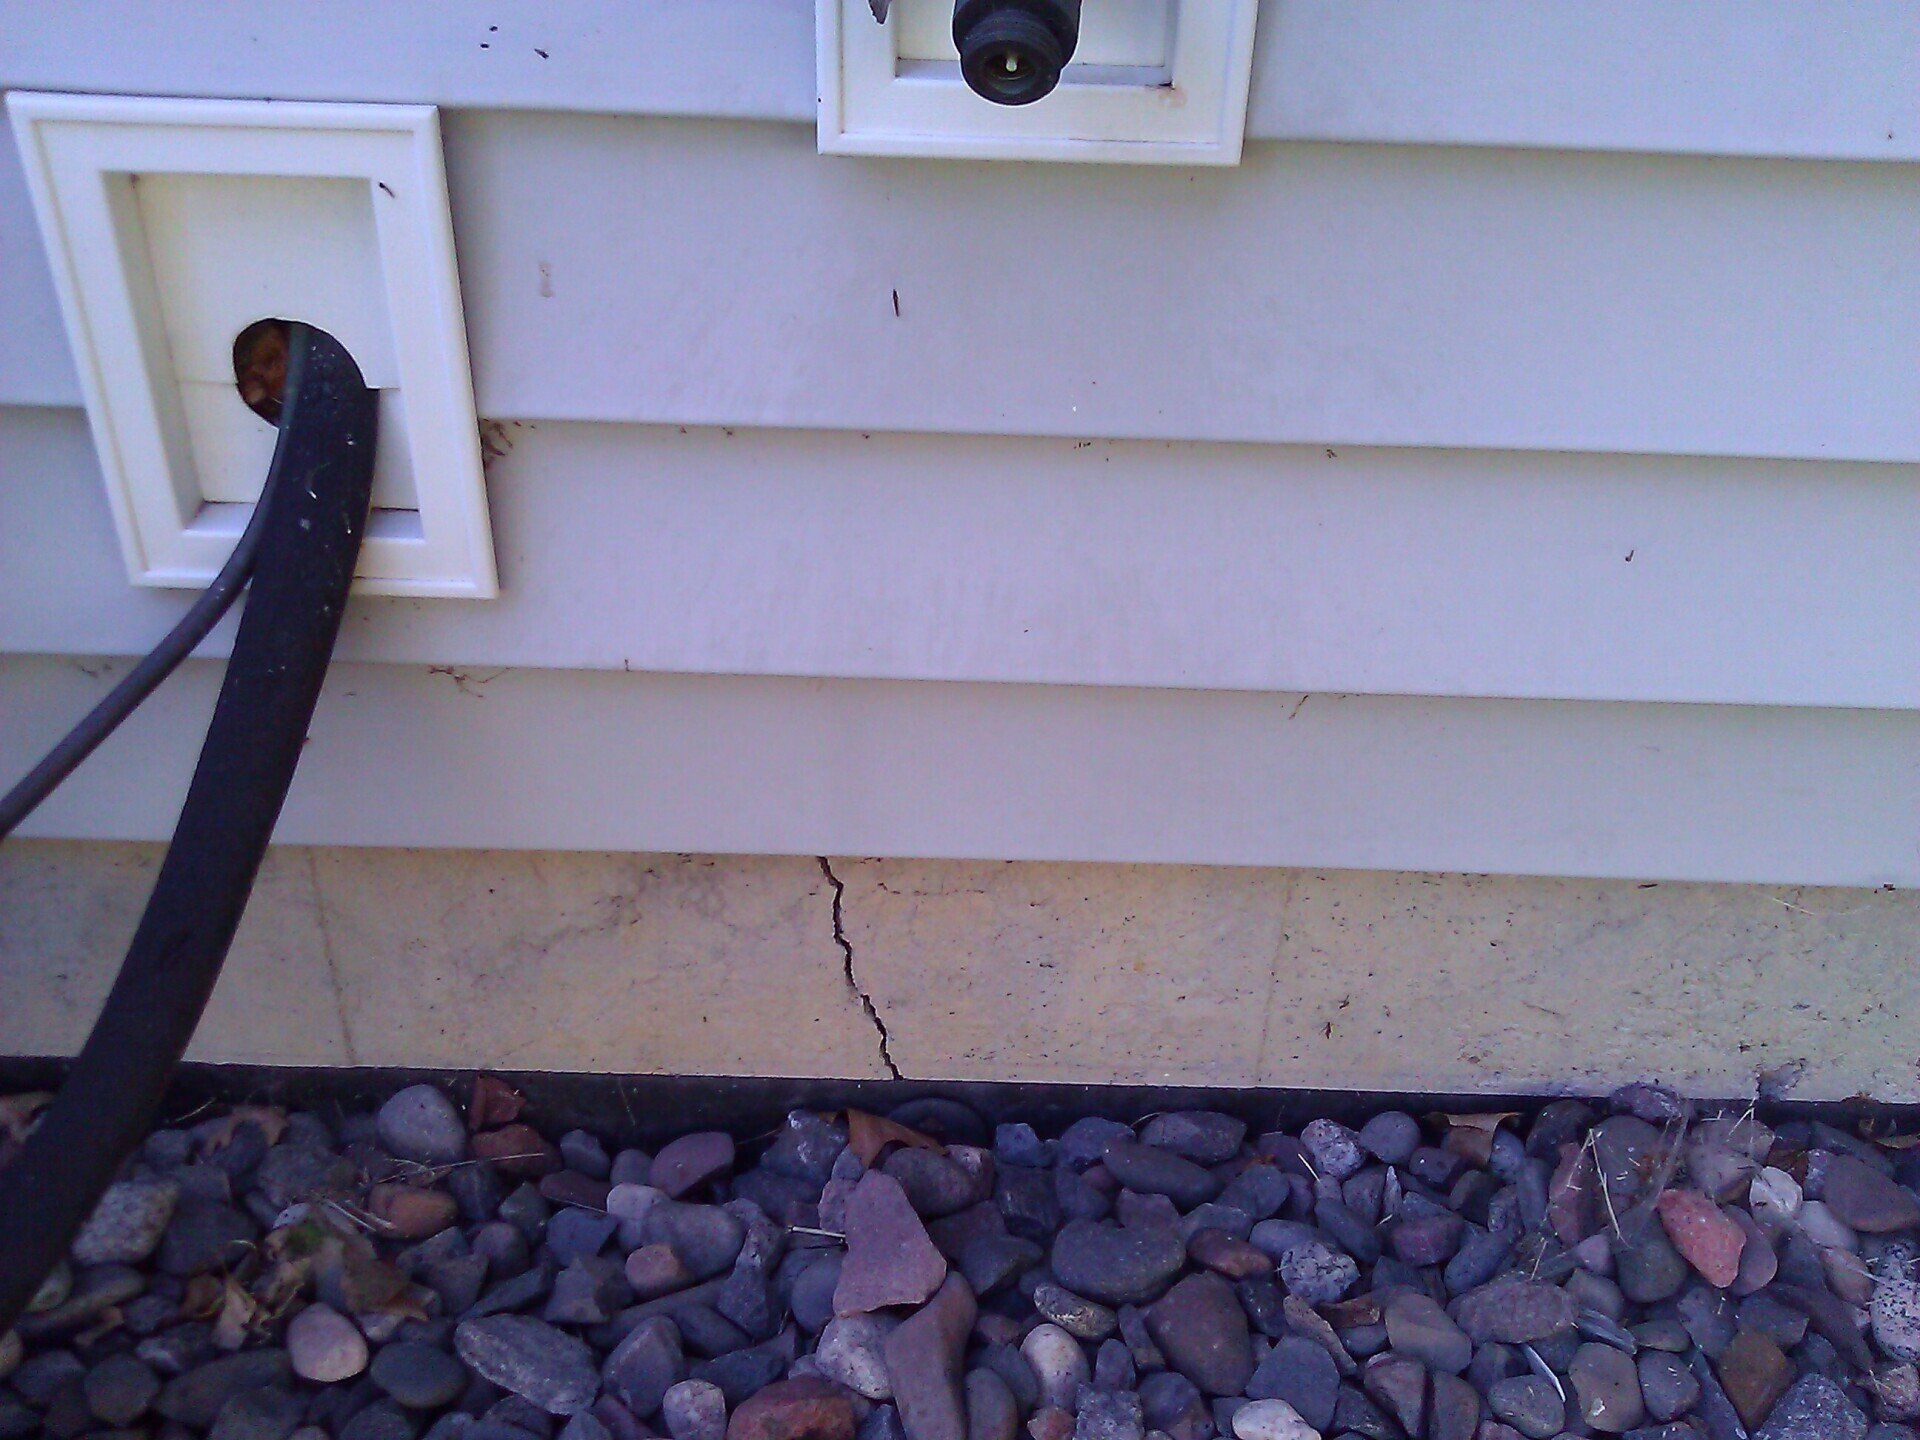 Foundation Crack Near Hose Connection Leaking Water